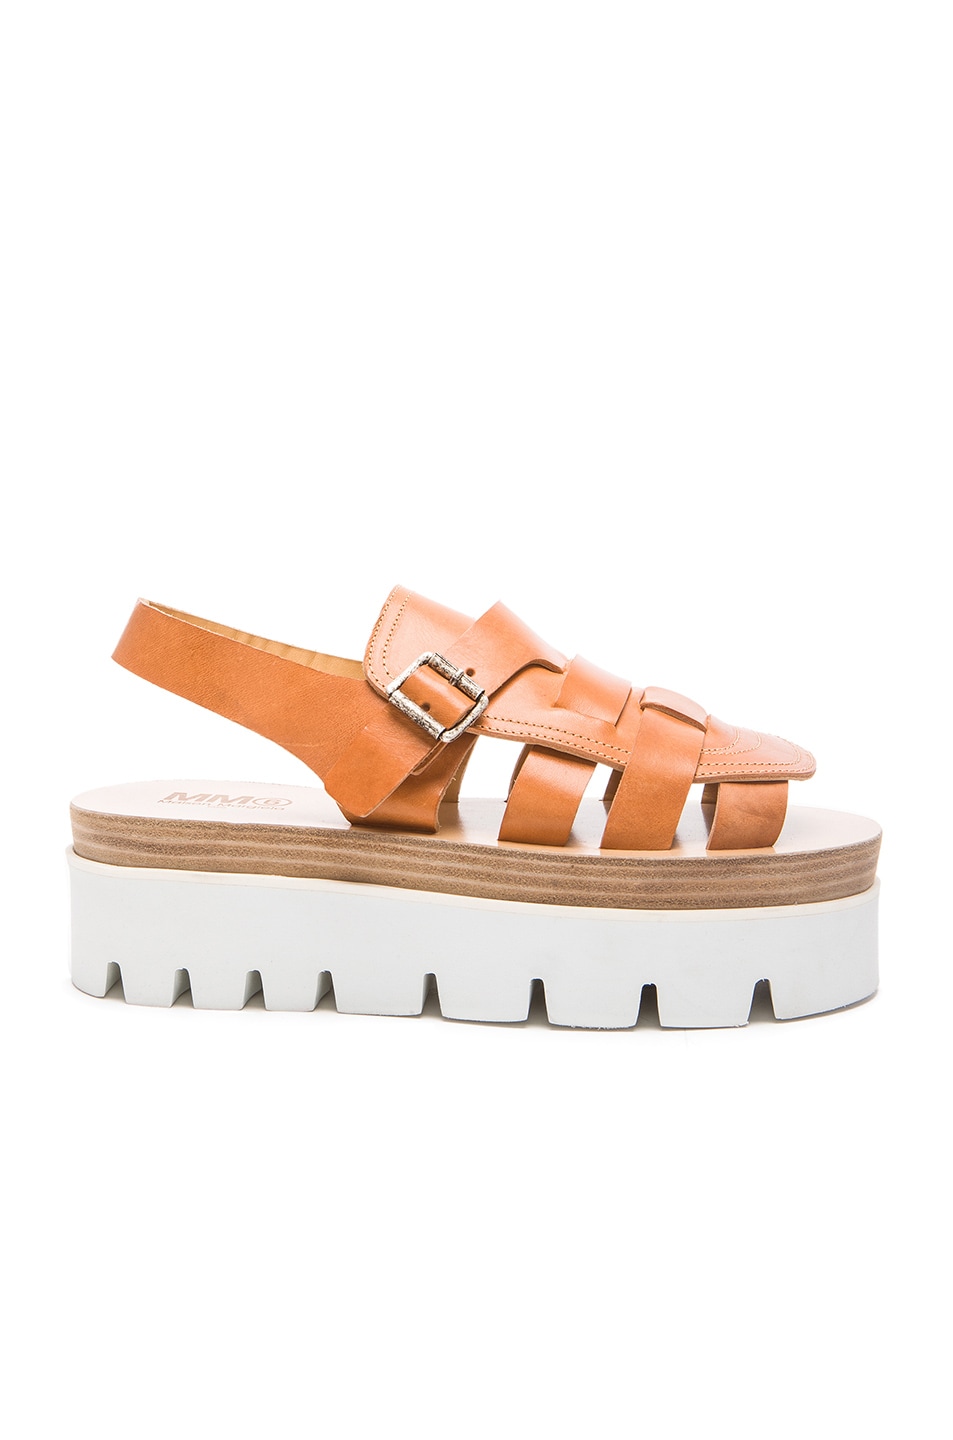 Image 1 of MM6 Maison Margiela Leather Sandals in Tan